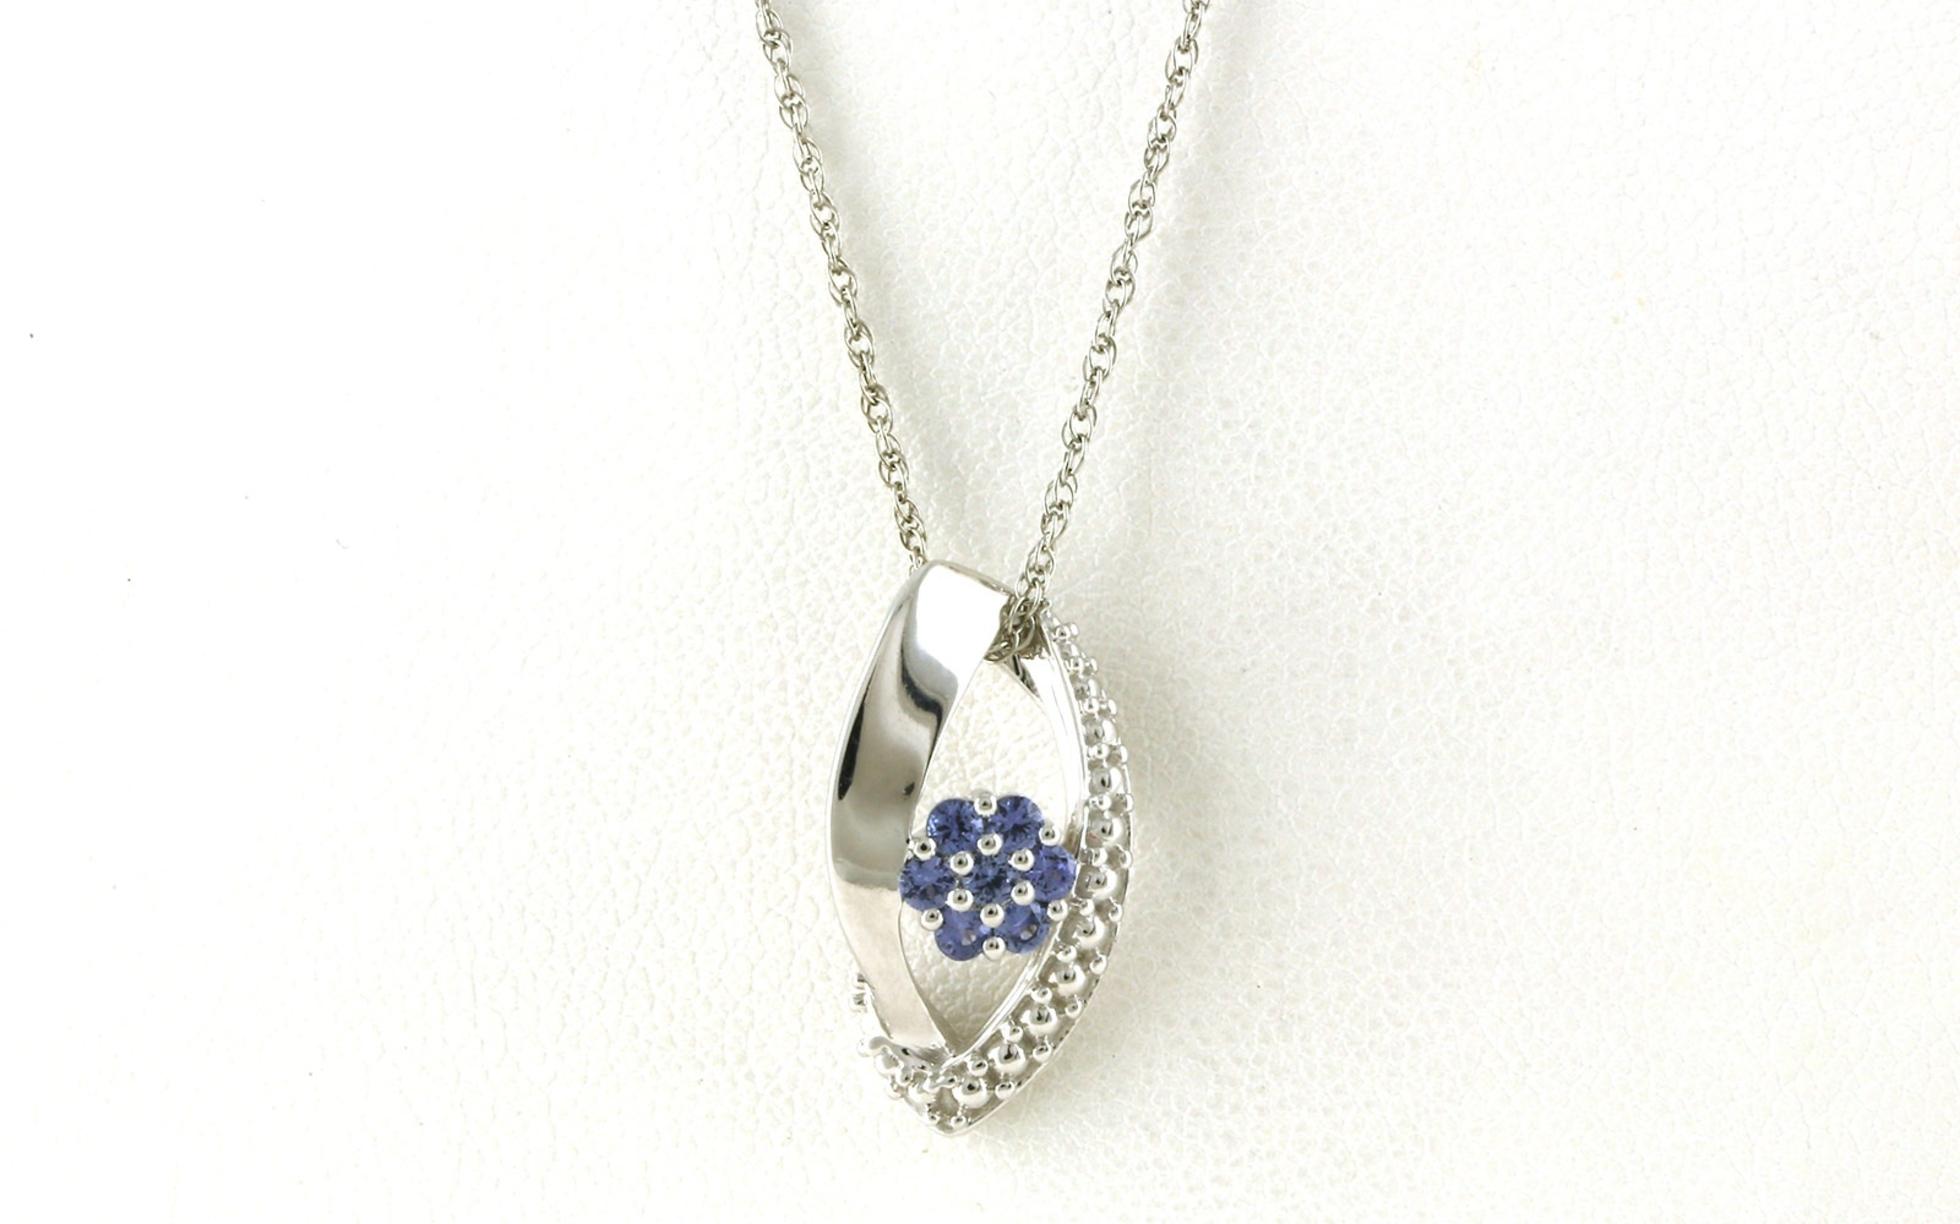 7-Stone Cluster Montana Yogo Sapphire Necklace with Beaded Detail in Sterling Silver (0.28cts TWT)